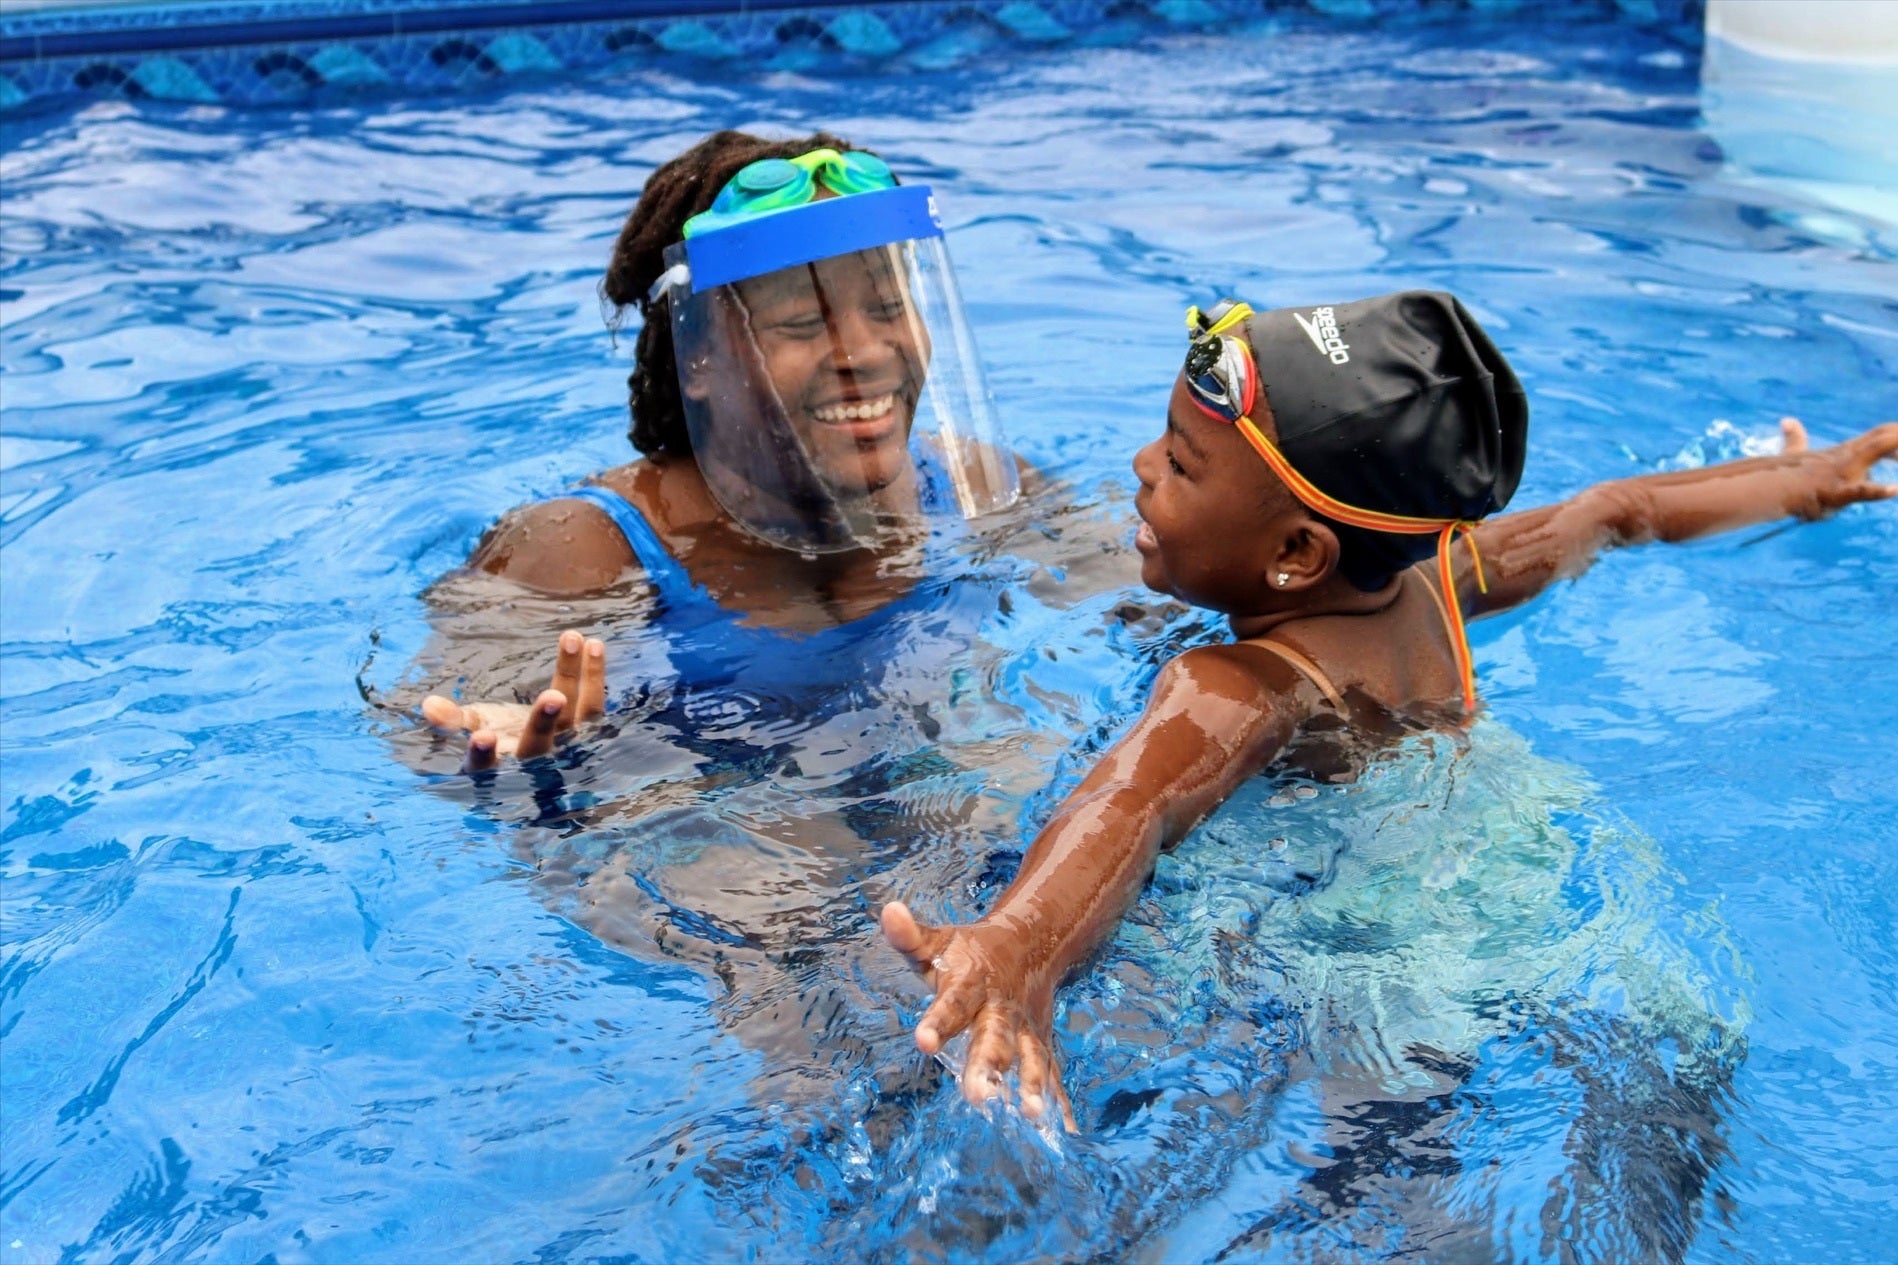 A woman wearing a face shield teaches a kid to swim in a pool